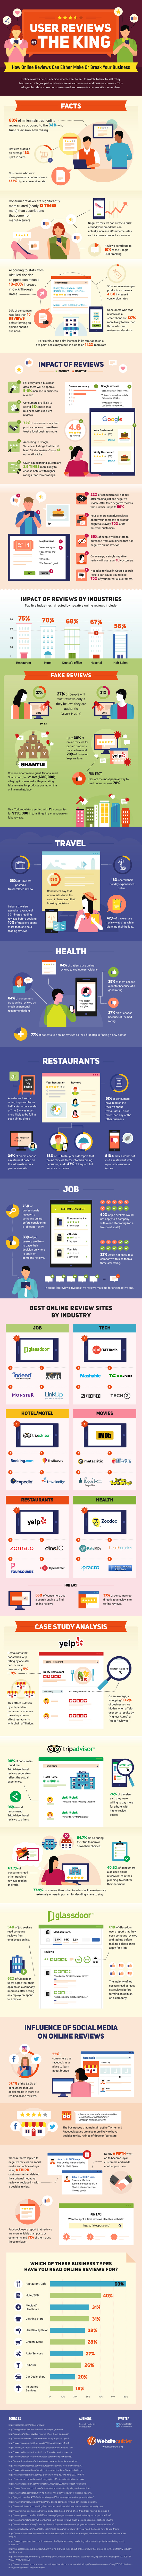 Infographic Online Reviews by Industry 